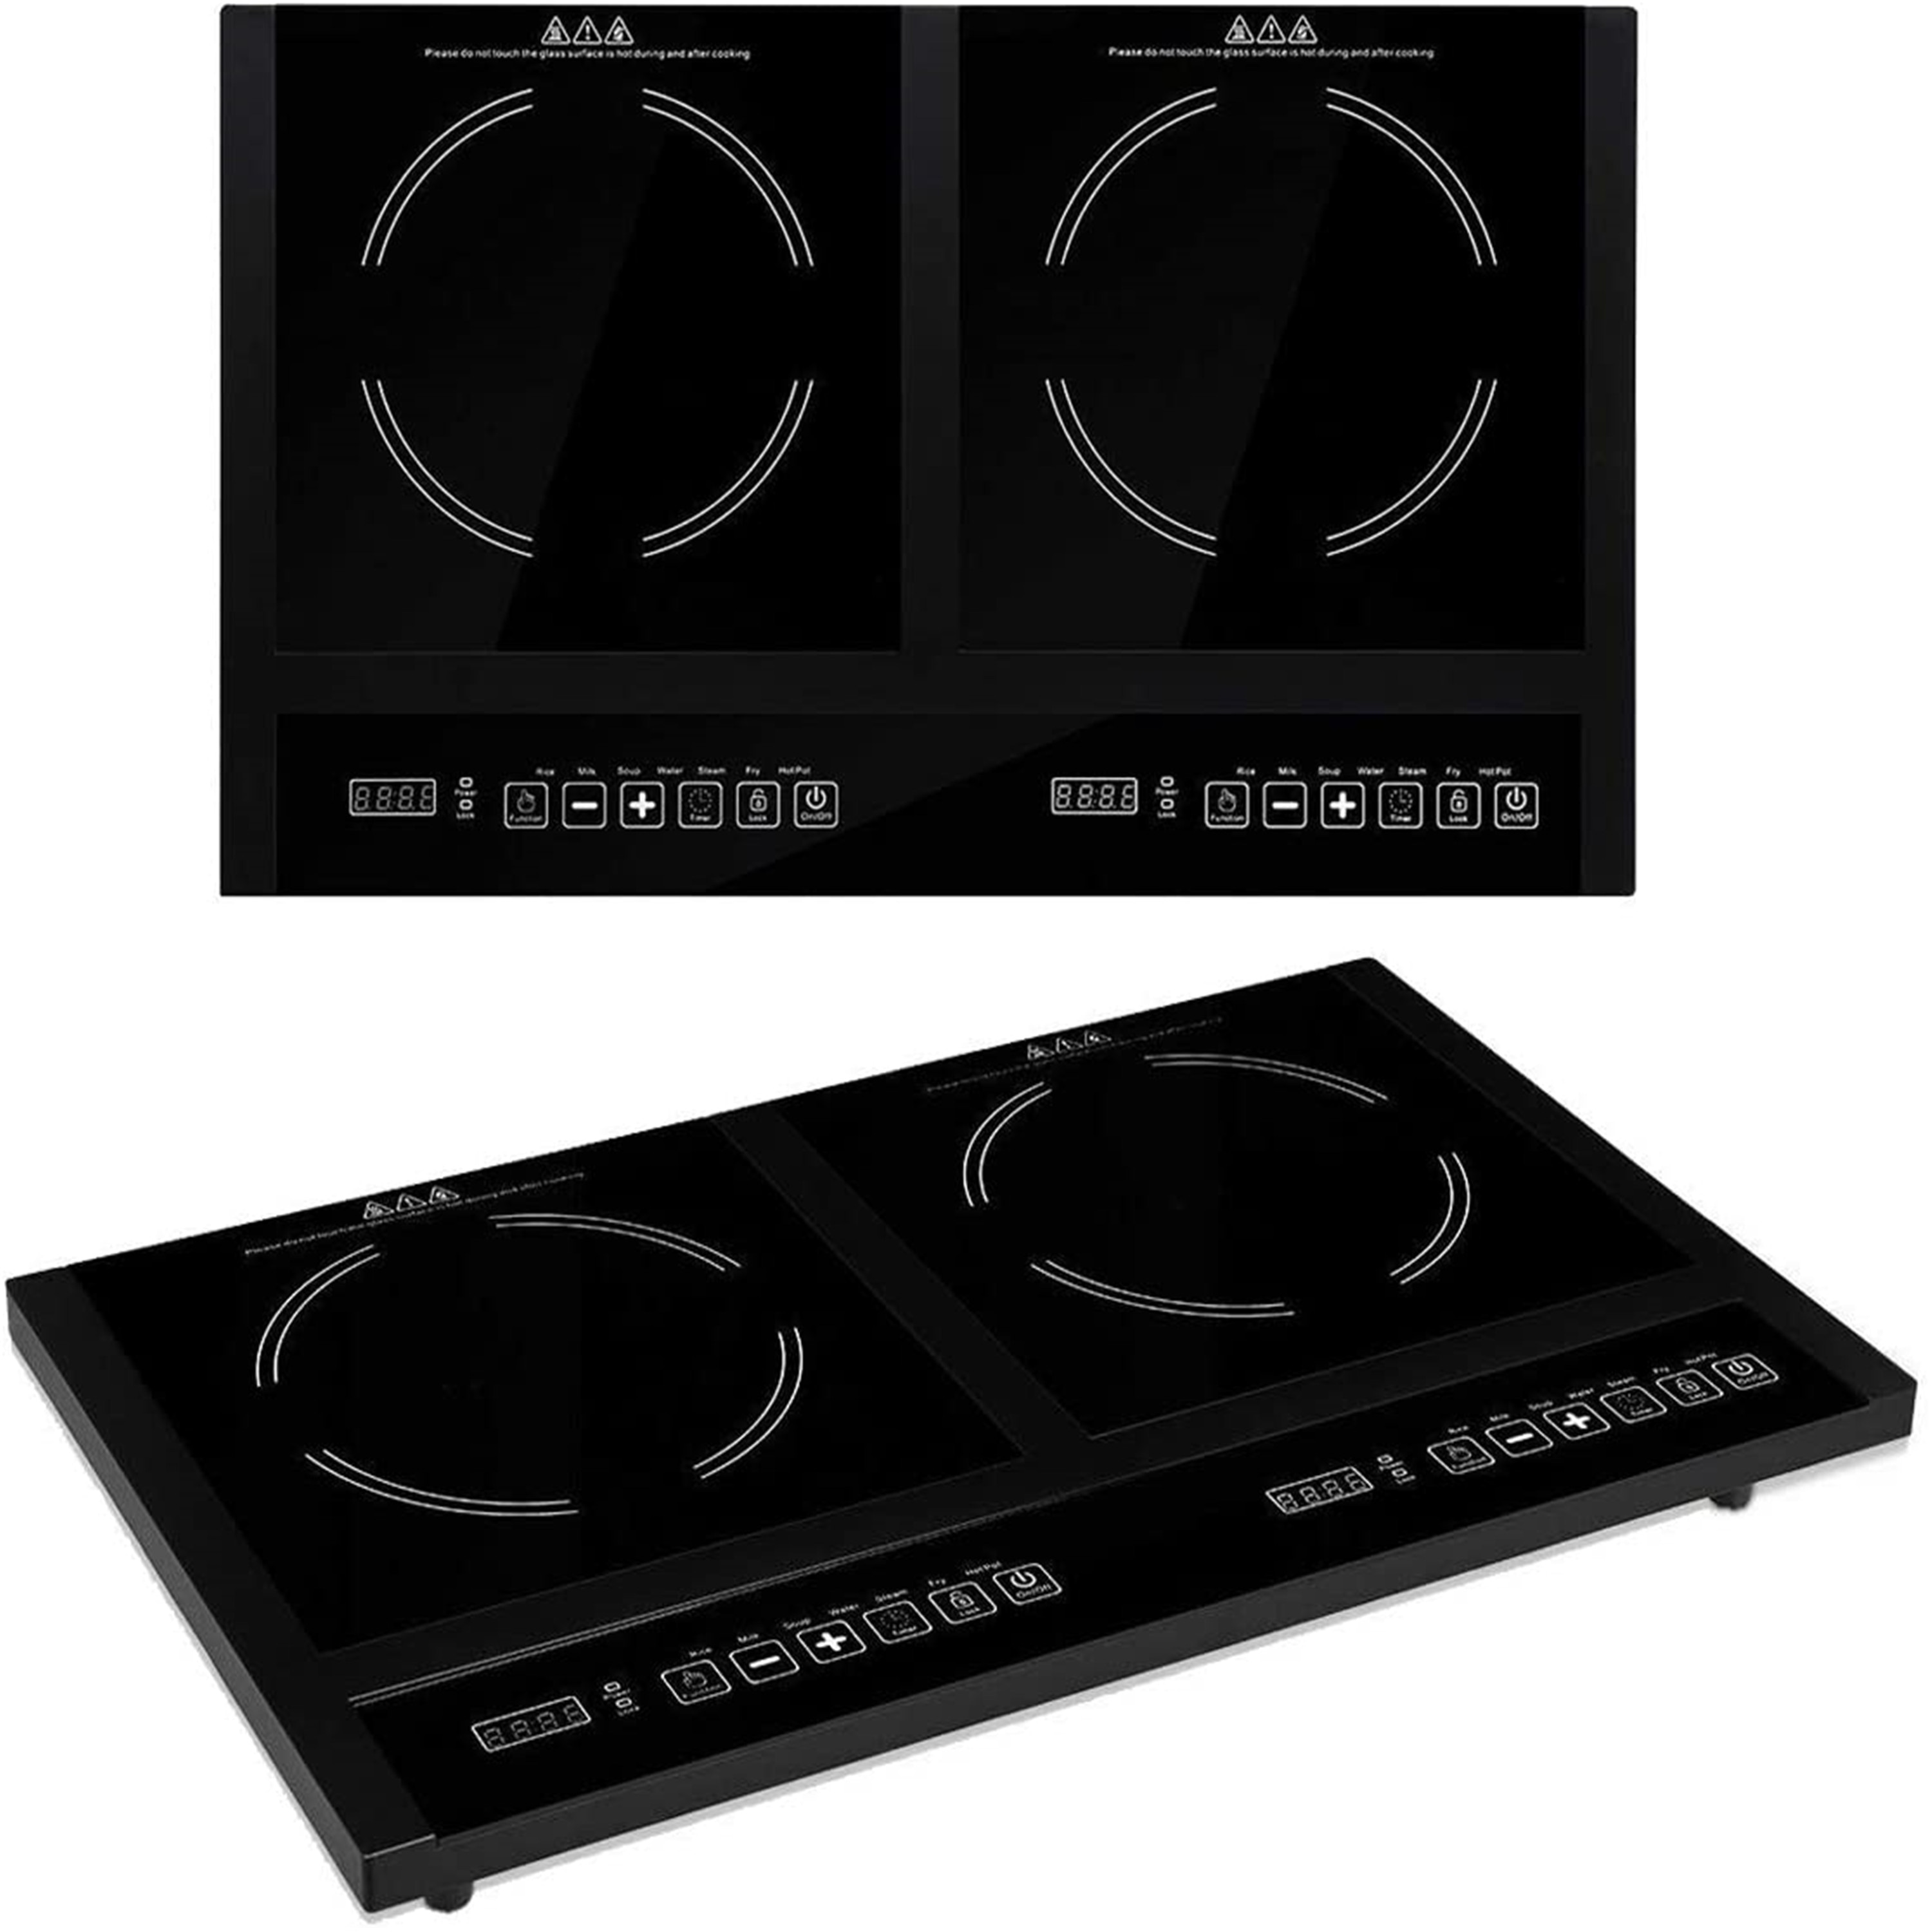 https://ak1.ostkcdn.com/images/products/is/images/direct/1062b01a046bb2661e38876f7b5a3a7eb6a29de8/1800W-Electric-Dual-Induction-Cooker-Cooktop-Countertop-Double-Burner.jpg